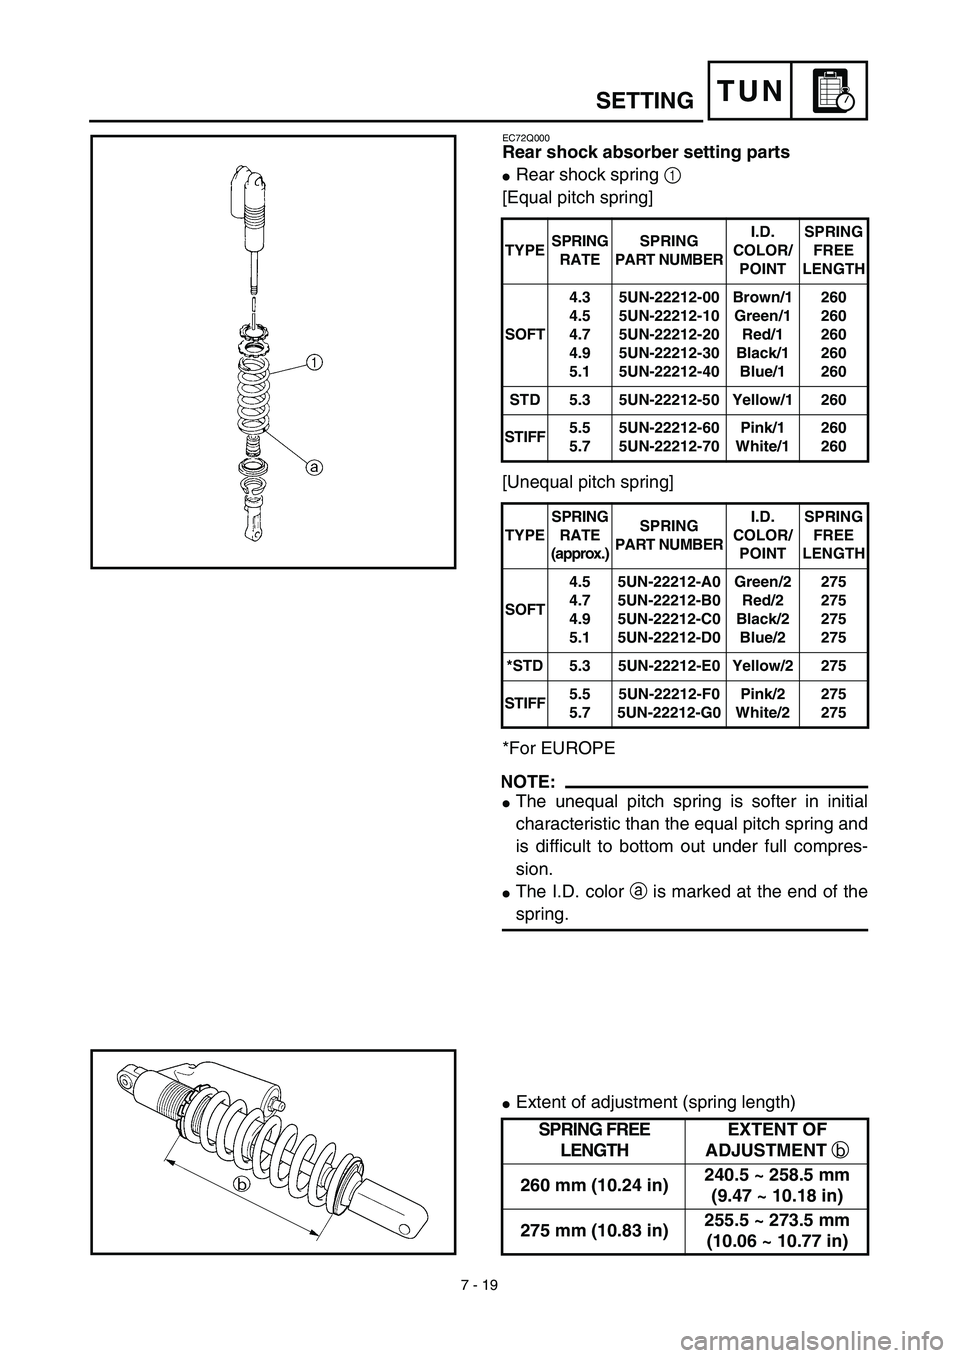 YAMAHA YZ450F 2003  Notices Demploi (in French) 7 - 19
TUNSETTING
EC72Q000
Rear shock absorber setting parts
Rear shock spring 1 
[Equal pitch spring]
[Unequal pitch spring]
*For EUROPE
NOTE:
The unequal pitch spring is softer in initial
characte